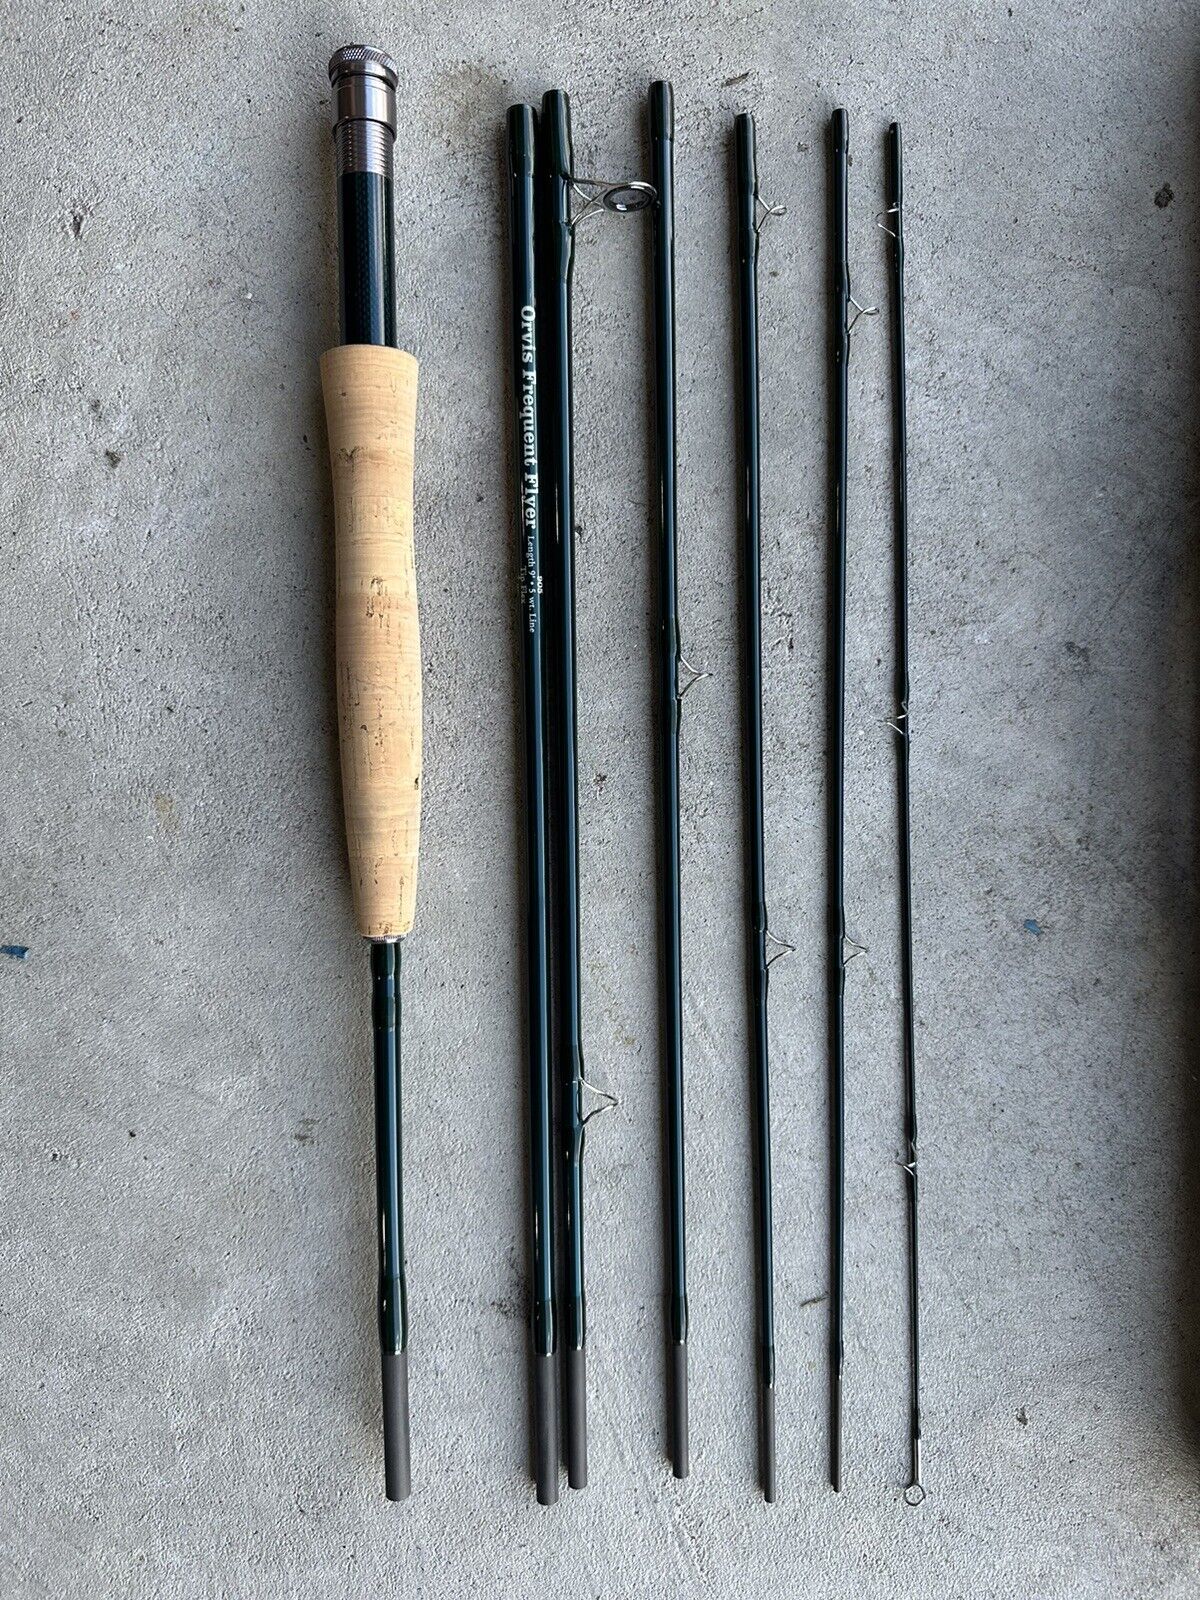 Orvis Frequent Flyer 5wt 7pc Fly Fishing Rod Orvis Orvis Frequent Flyer 5wt - фотография #2